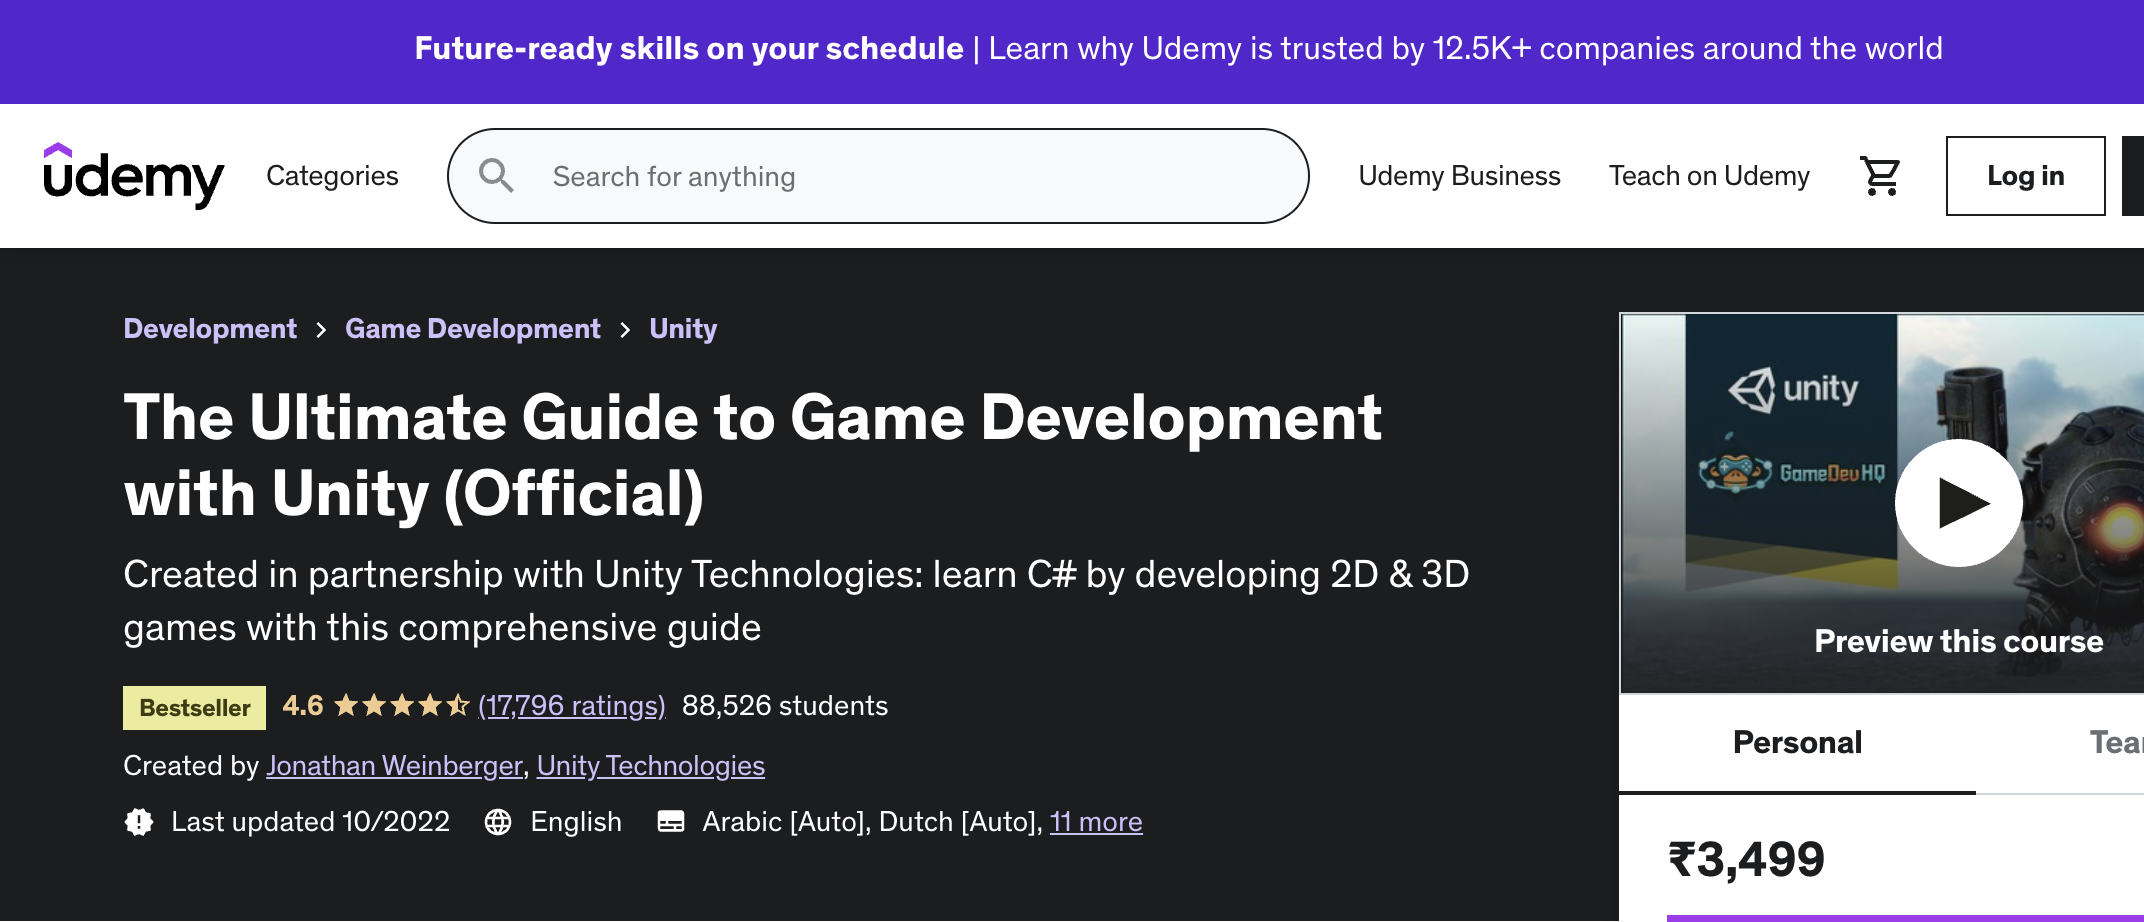 The Ultimate Guide to Game Development with Unity